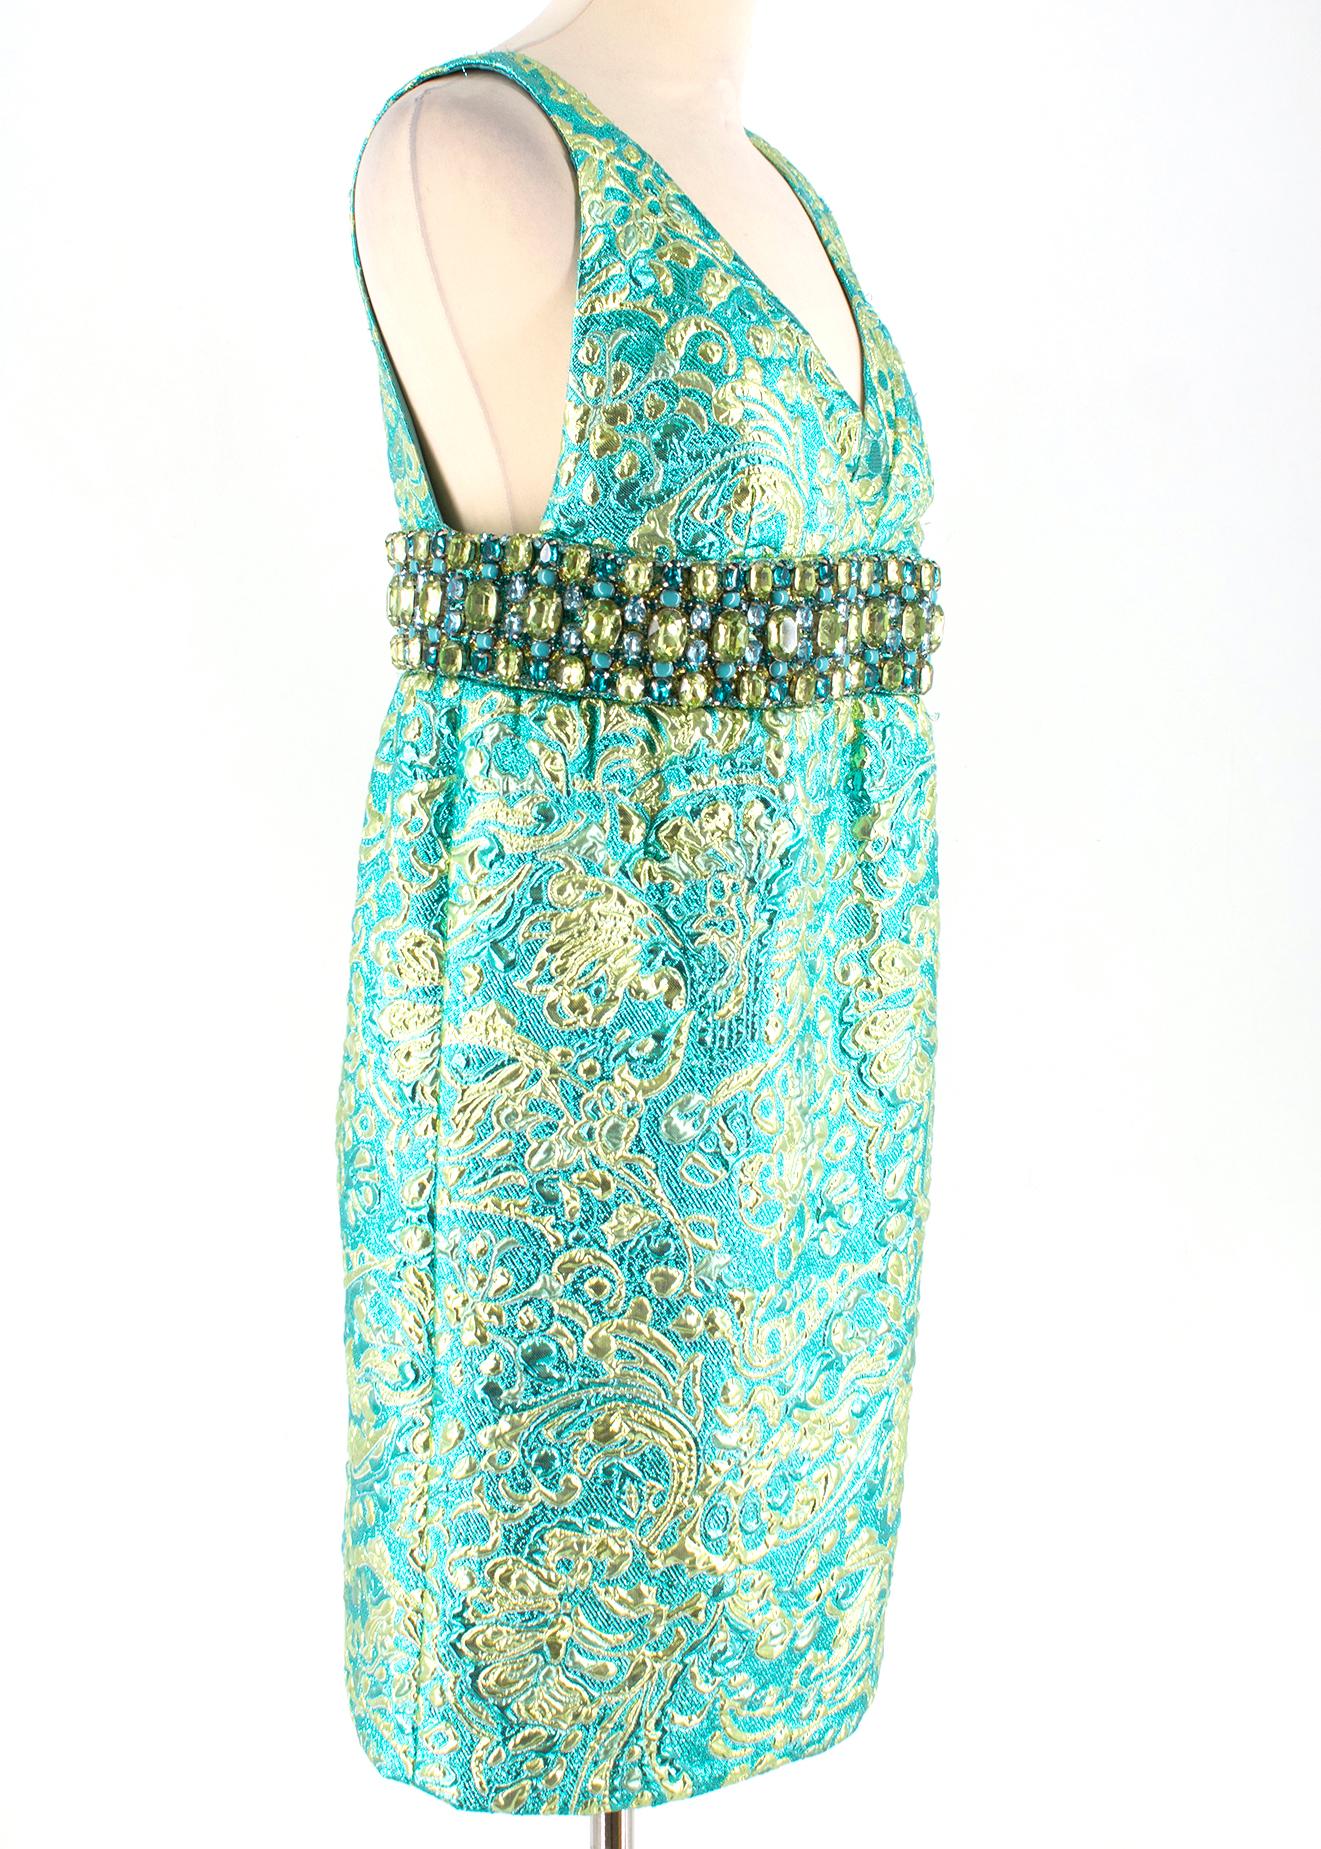 Michael Kors Collection Crystal Embellished Metallic Brocade Dress

tonal blue and green brocade;
concealed hook and zip fastening at back;
heavily embellished;
non-stretchy fabric;
Made in Italy

Please note, these items are pre-owned and may show